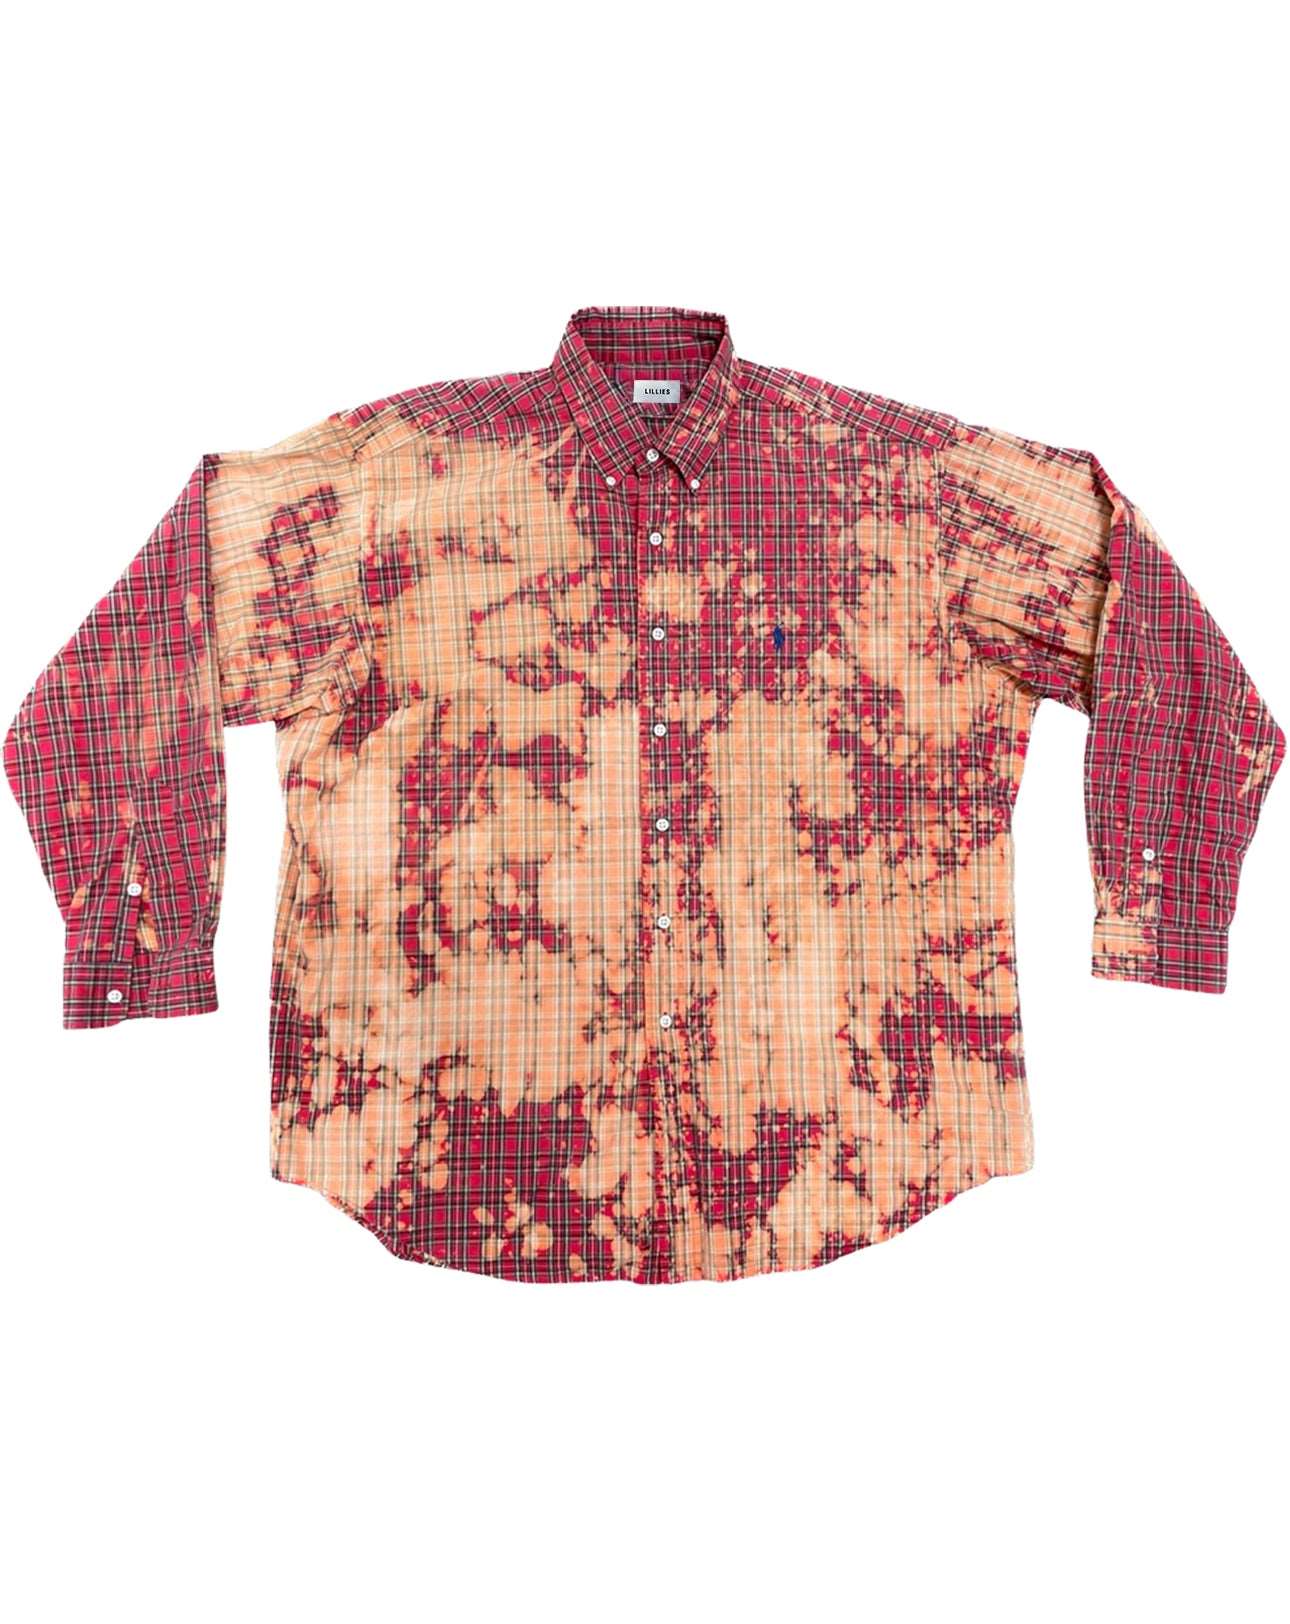 The Red November Shirt flannel vintage overise unisex dyed by hand handcrafted red orange old look 